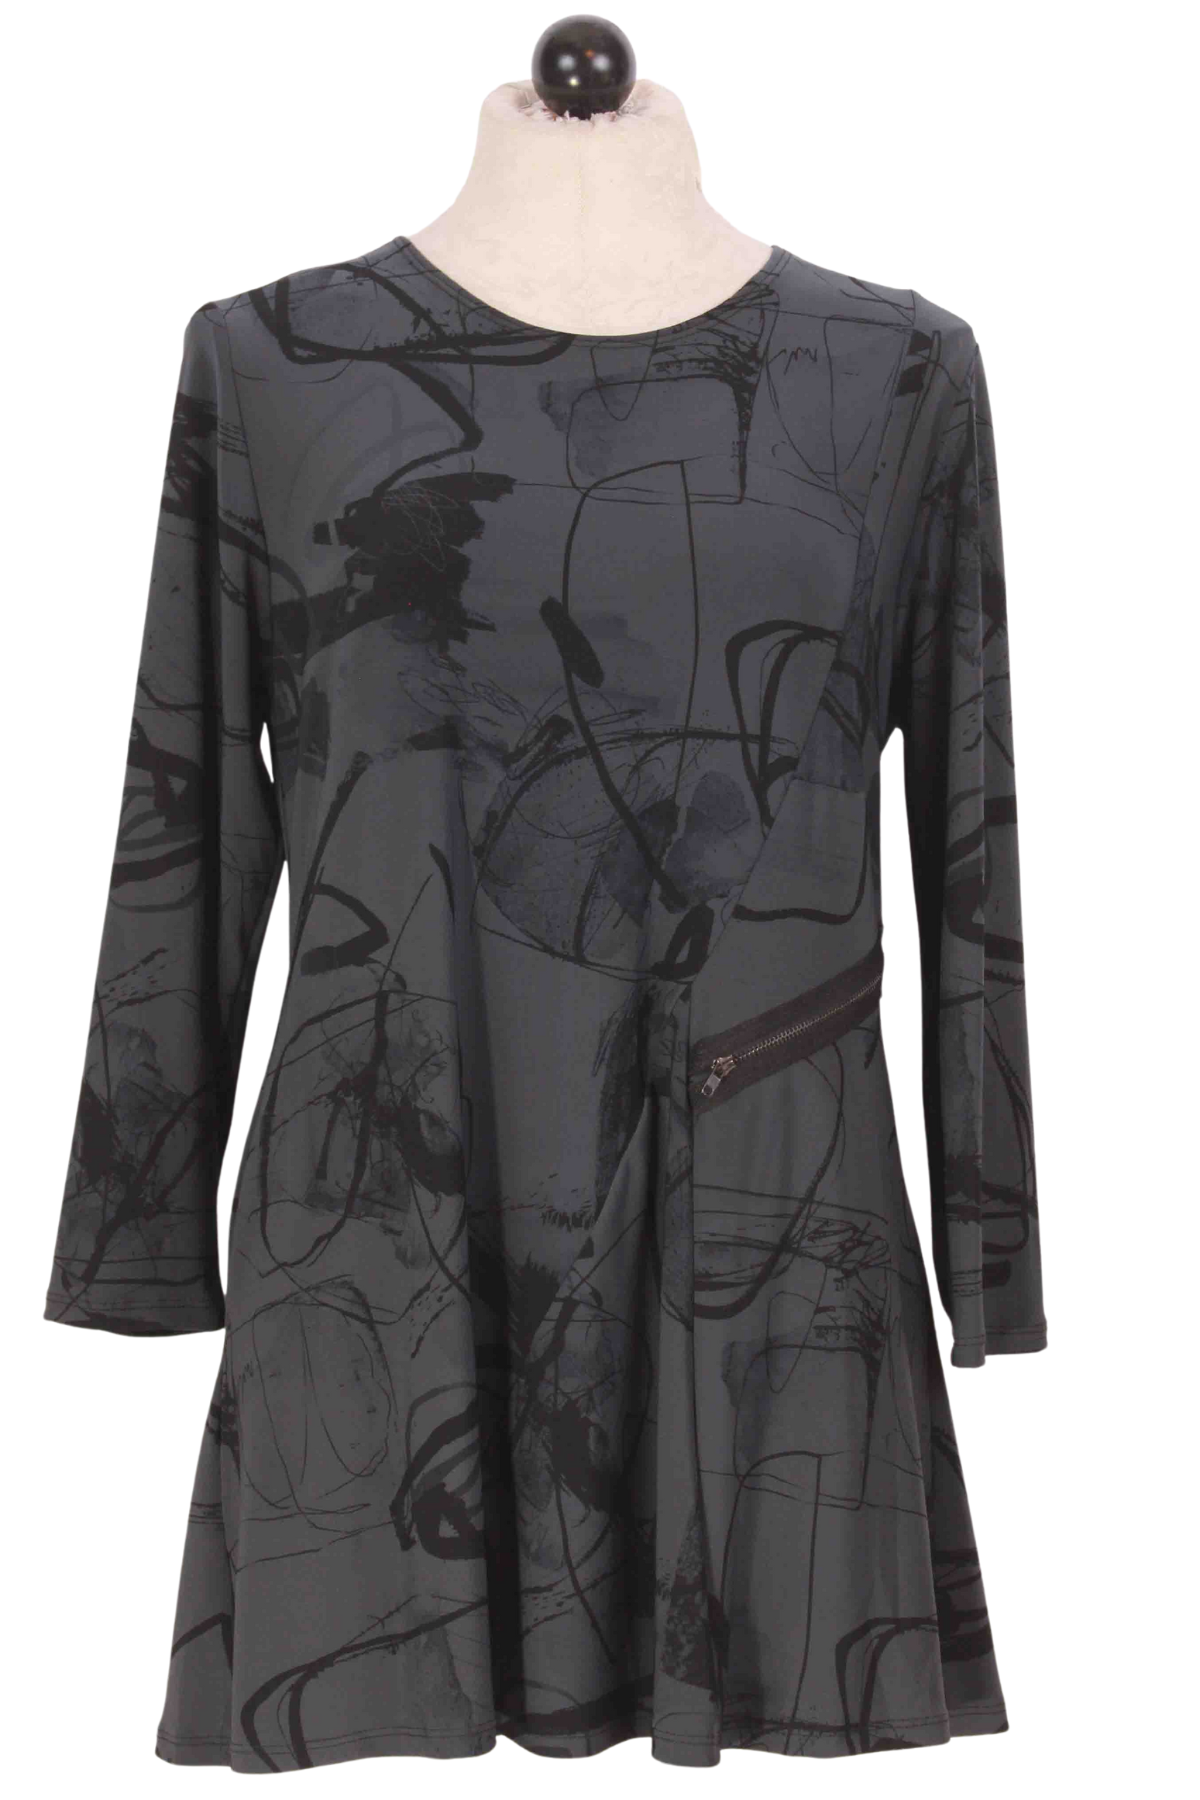 Printed Tunic with Zipper by Reina Lee